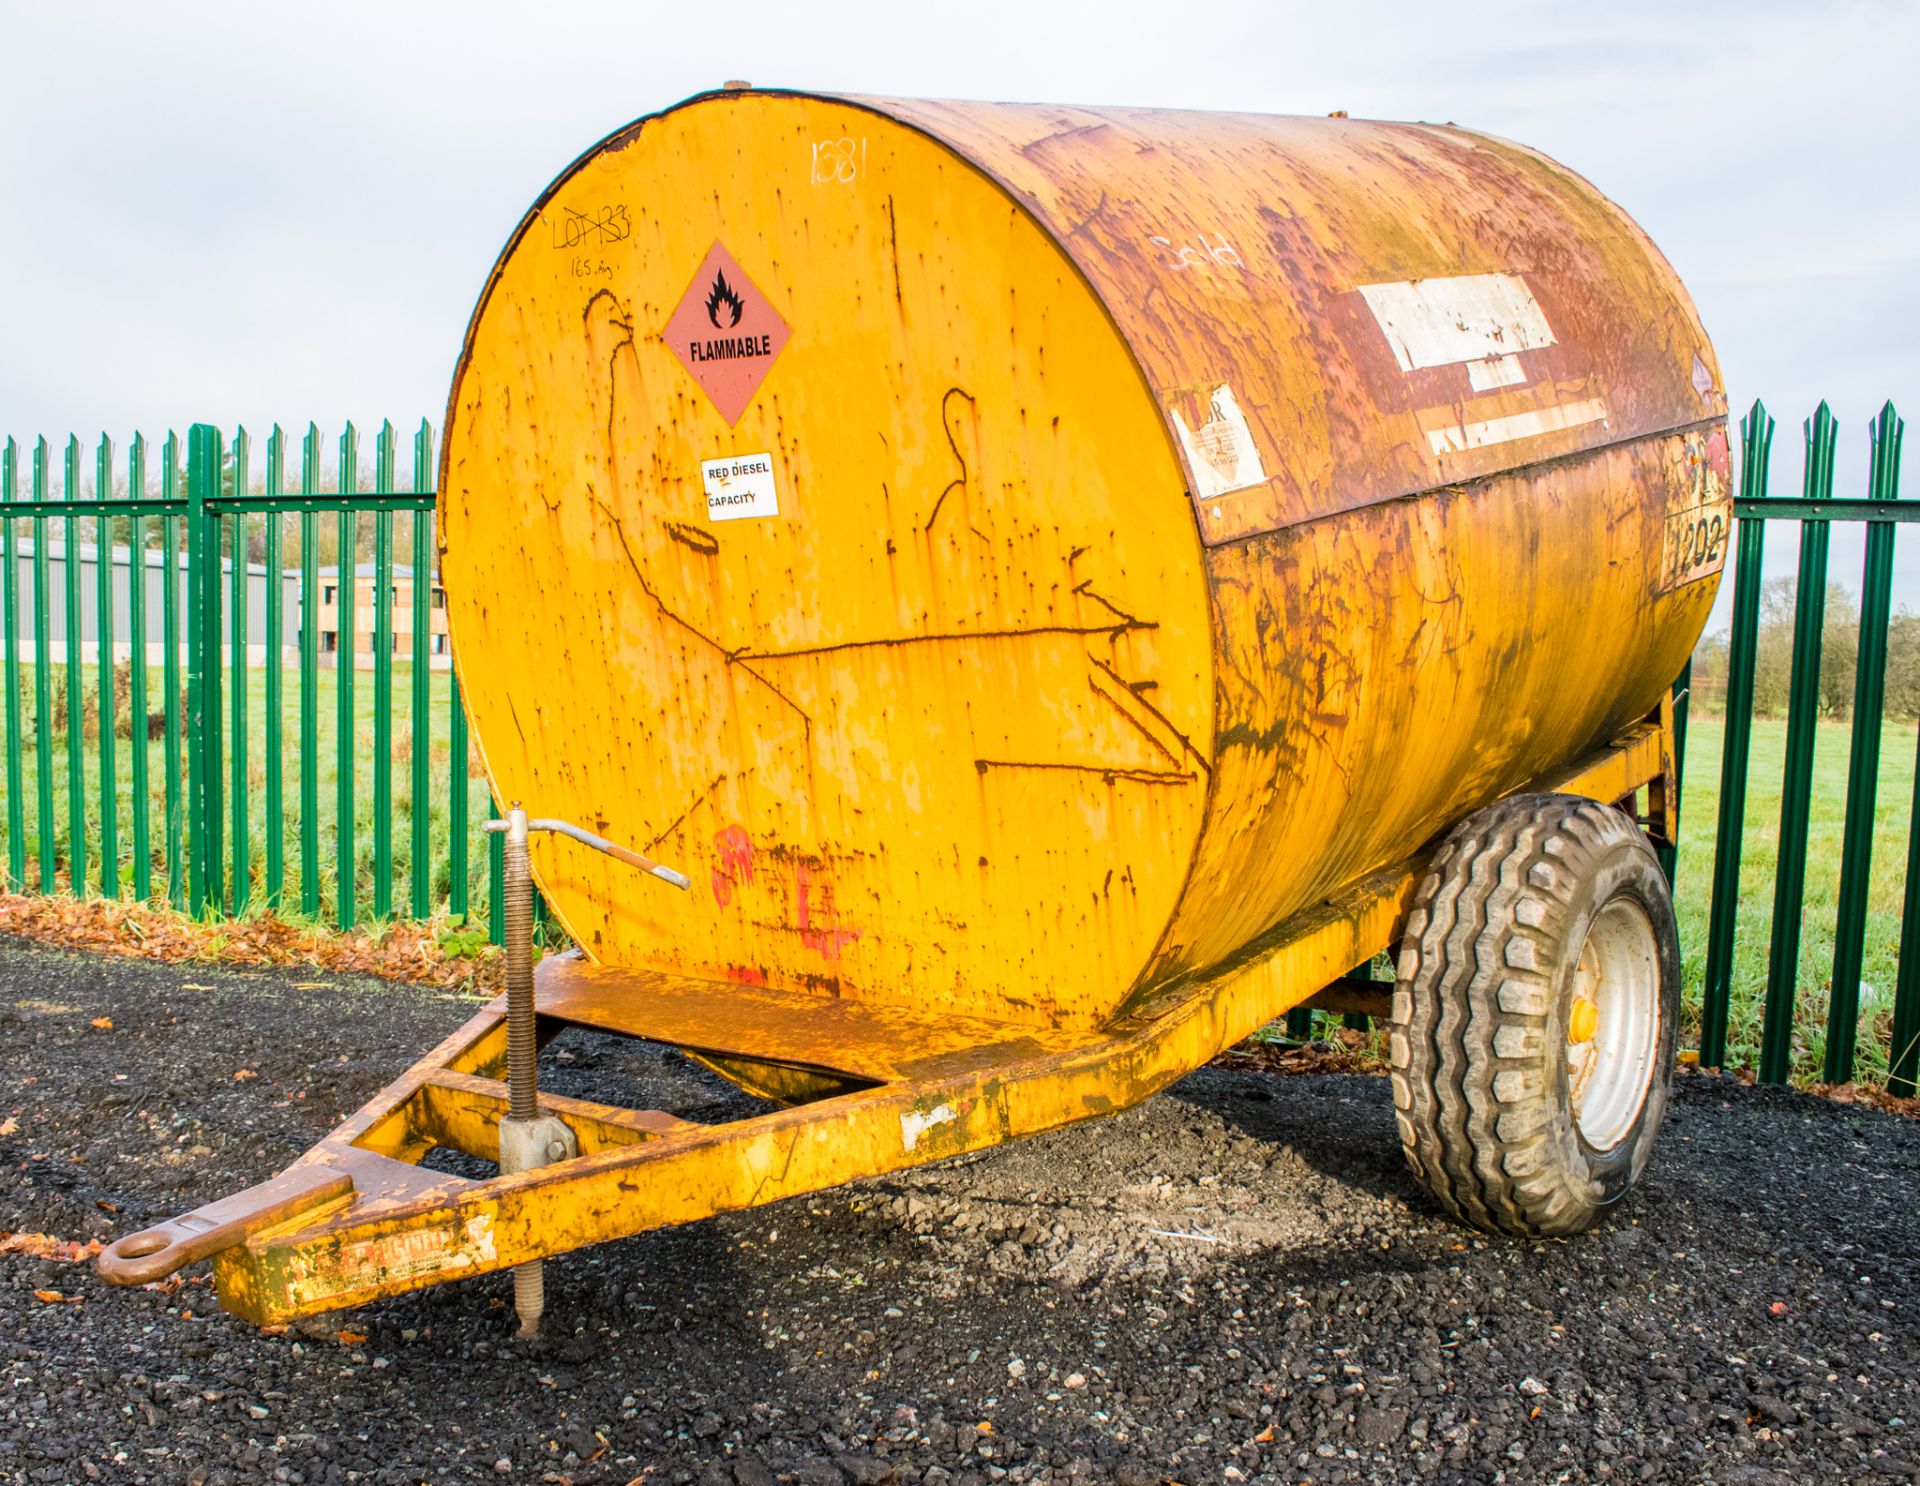 Trailer Engineering 500 gallon site tow bunded fuel bowser  c/w hand pump, delivery hose, and